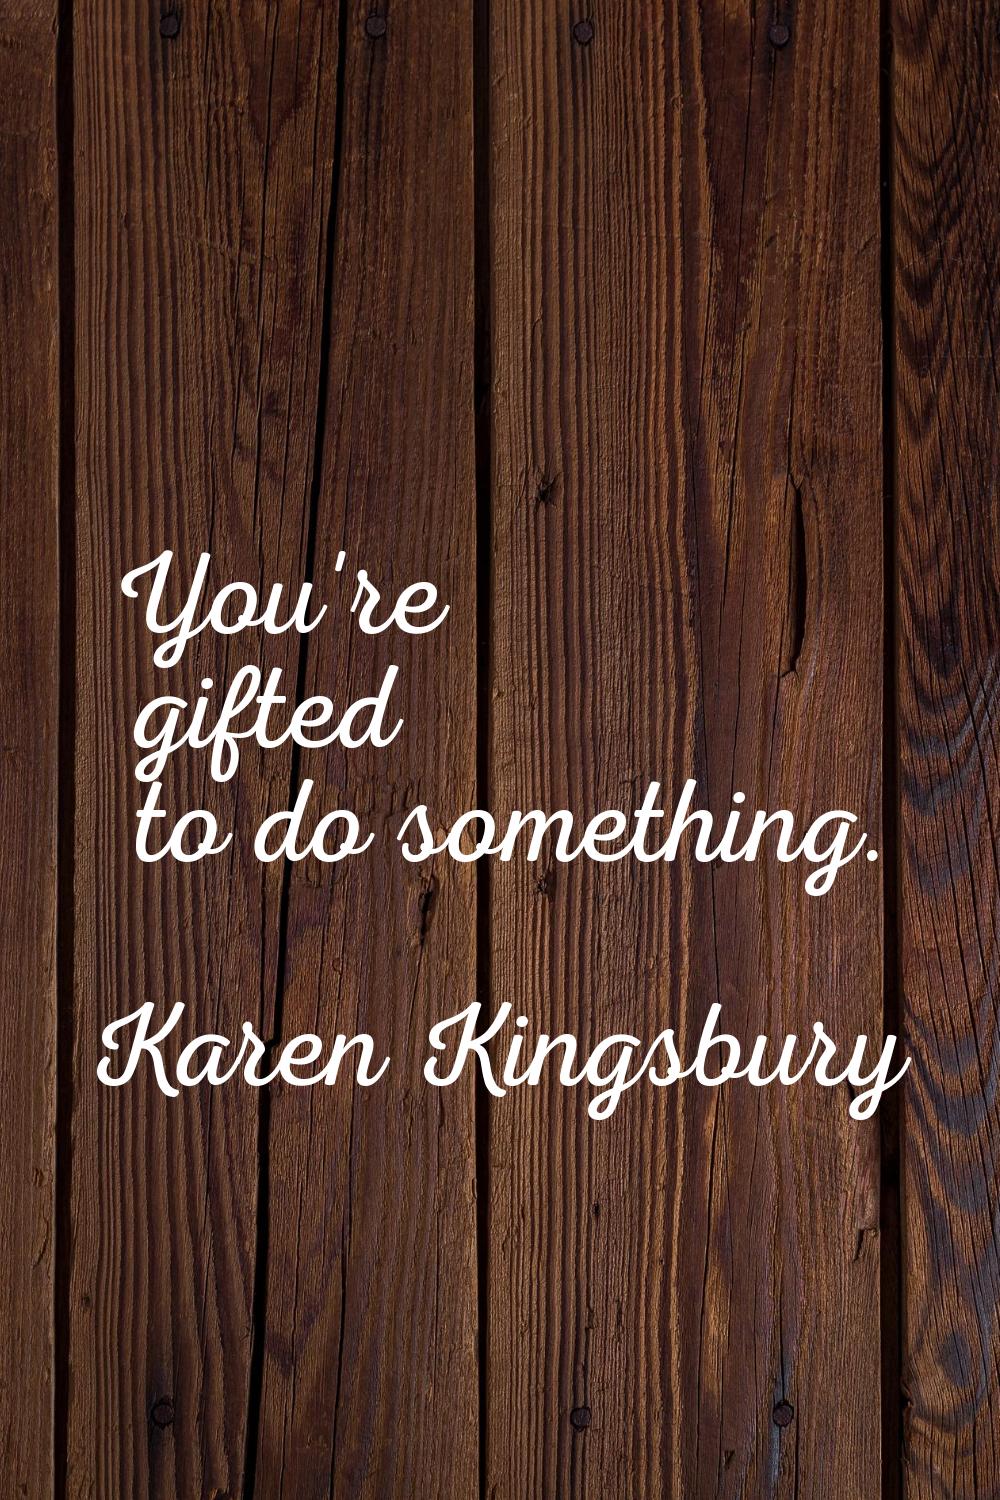 You're gifted to do something.